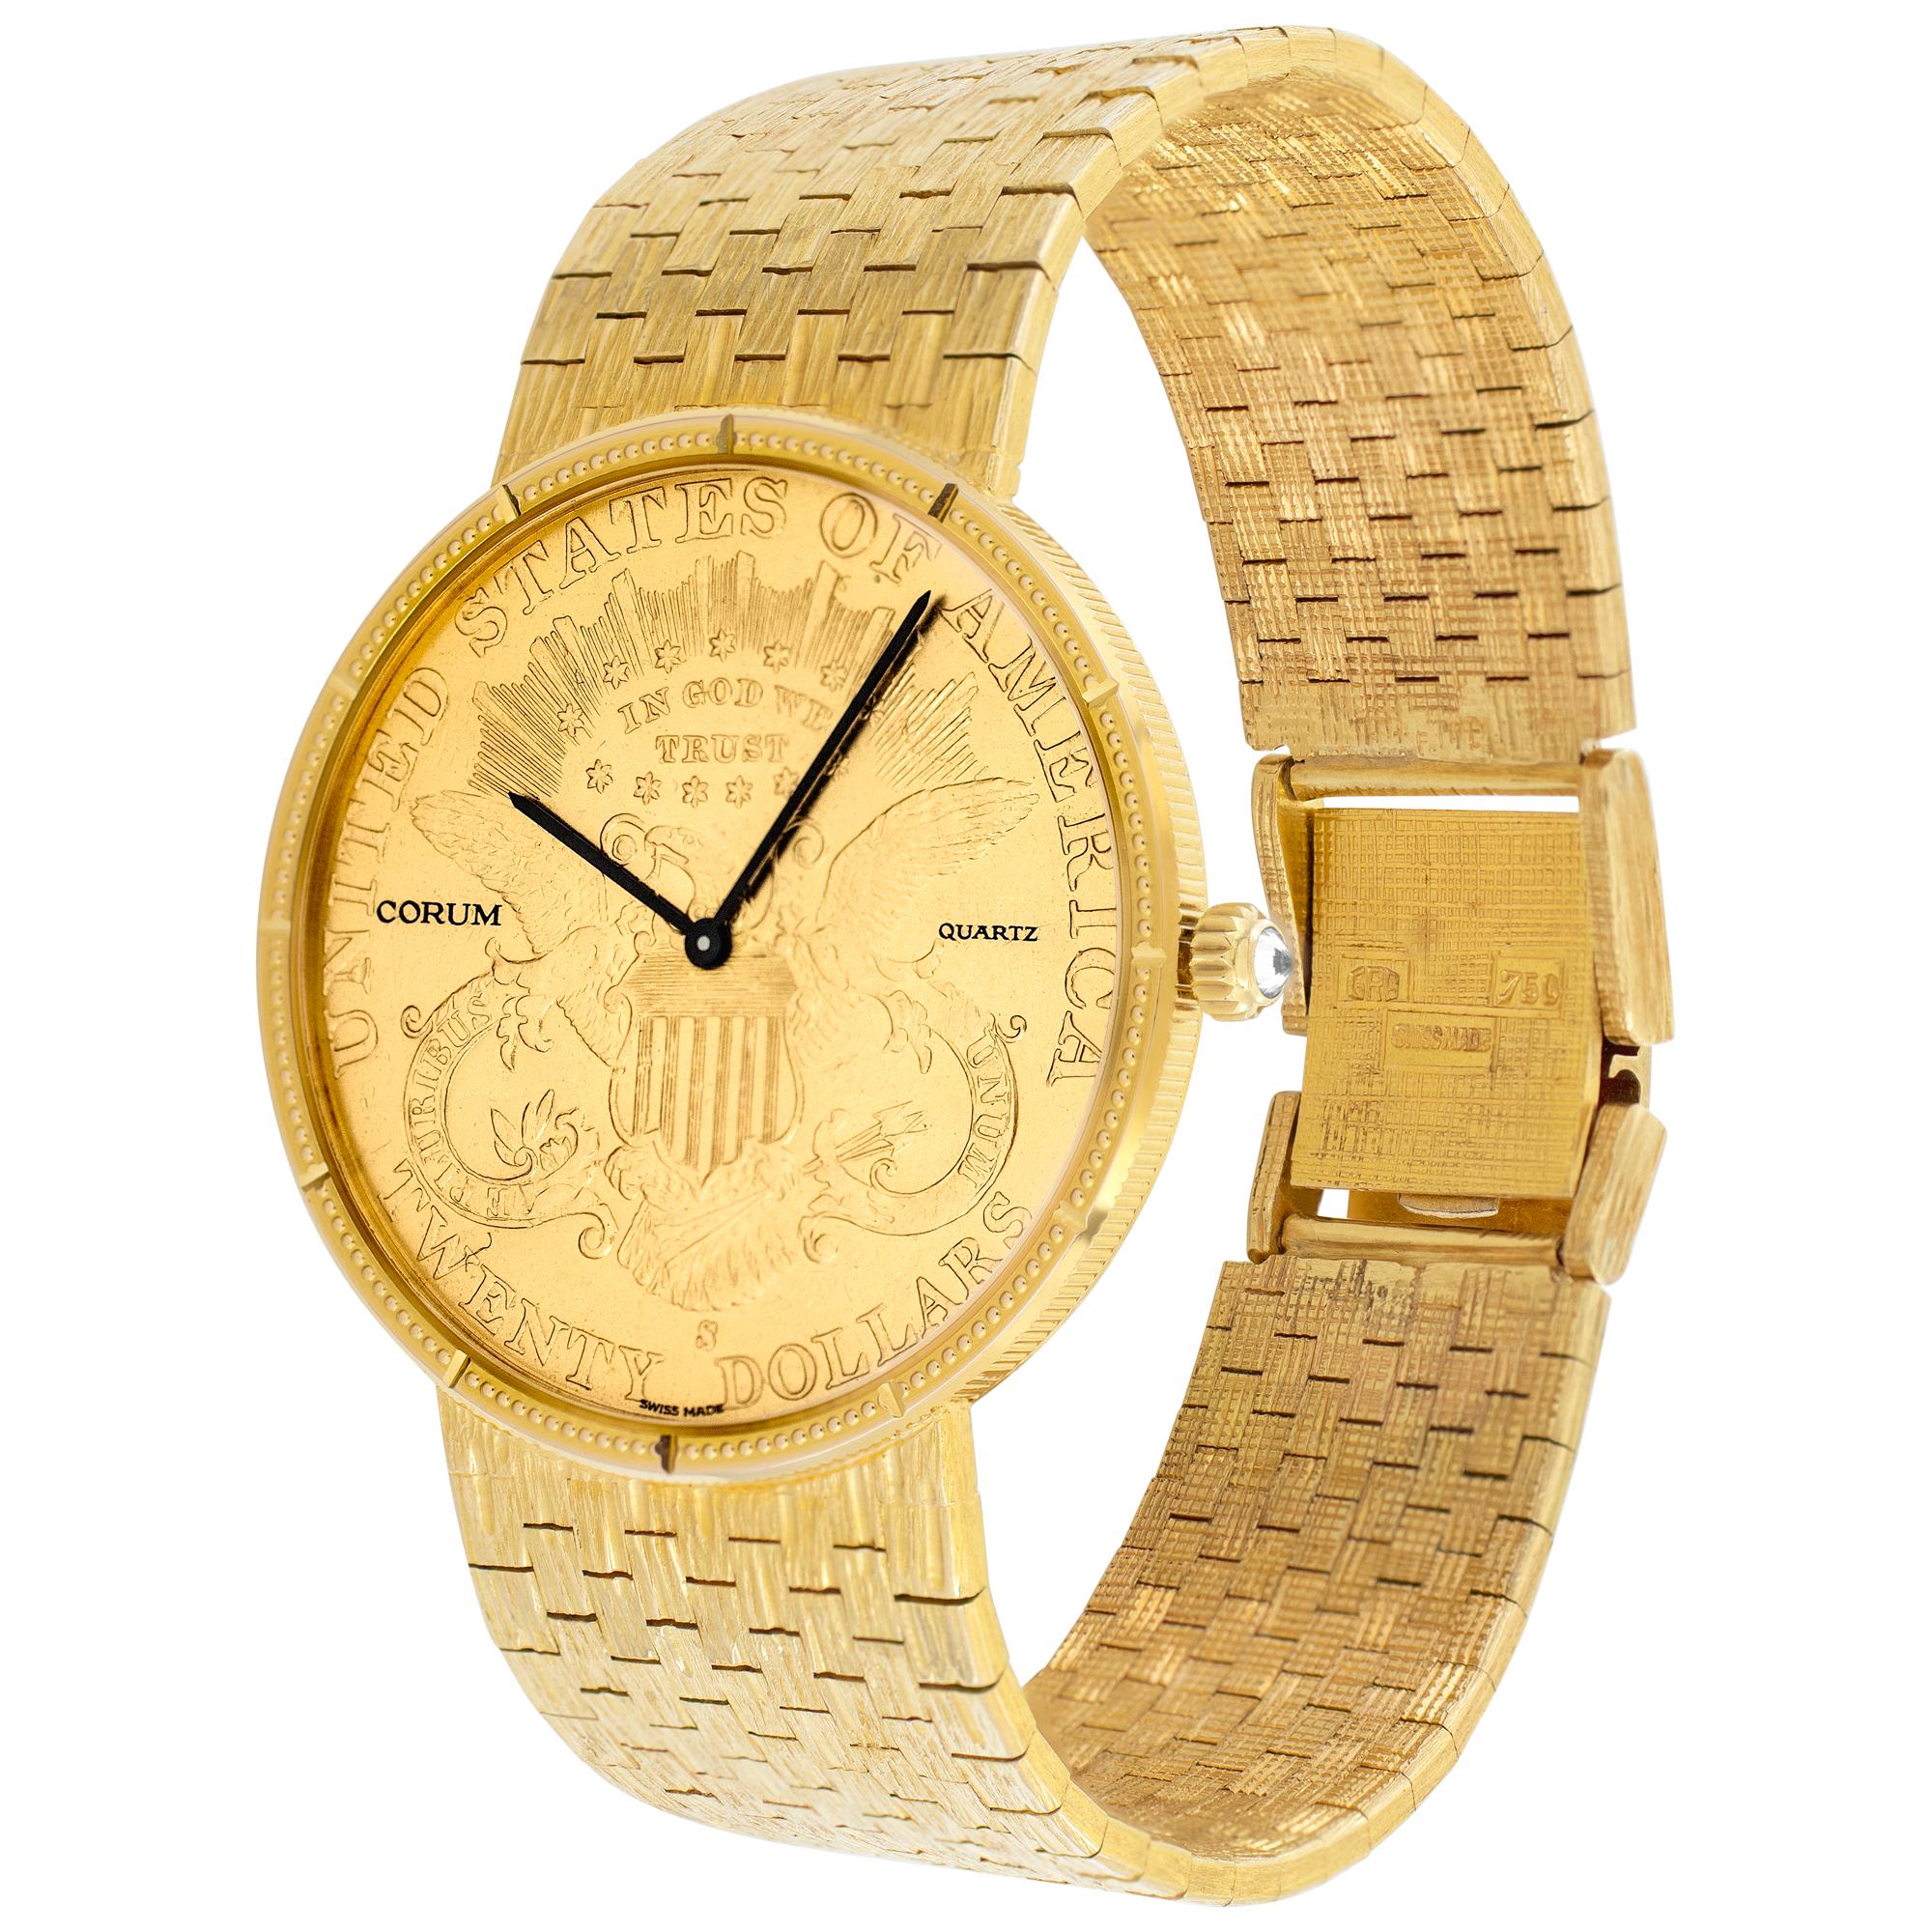 Corum $20 gold coin in 18k, with original diamond crown on 18k mesh band. Will fit up to 6.75